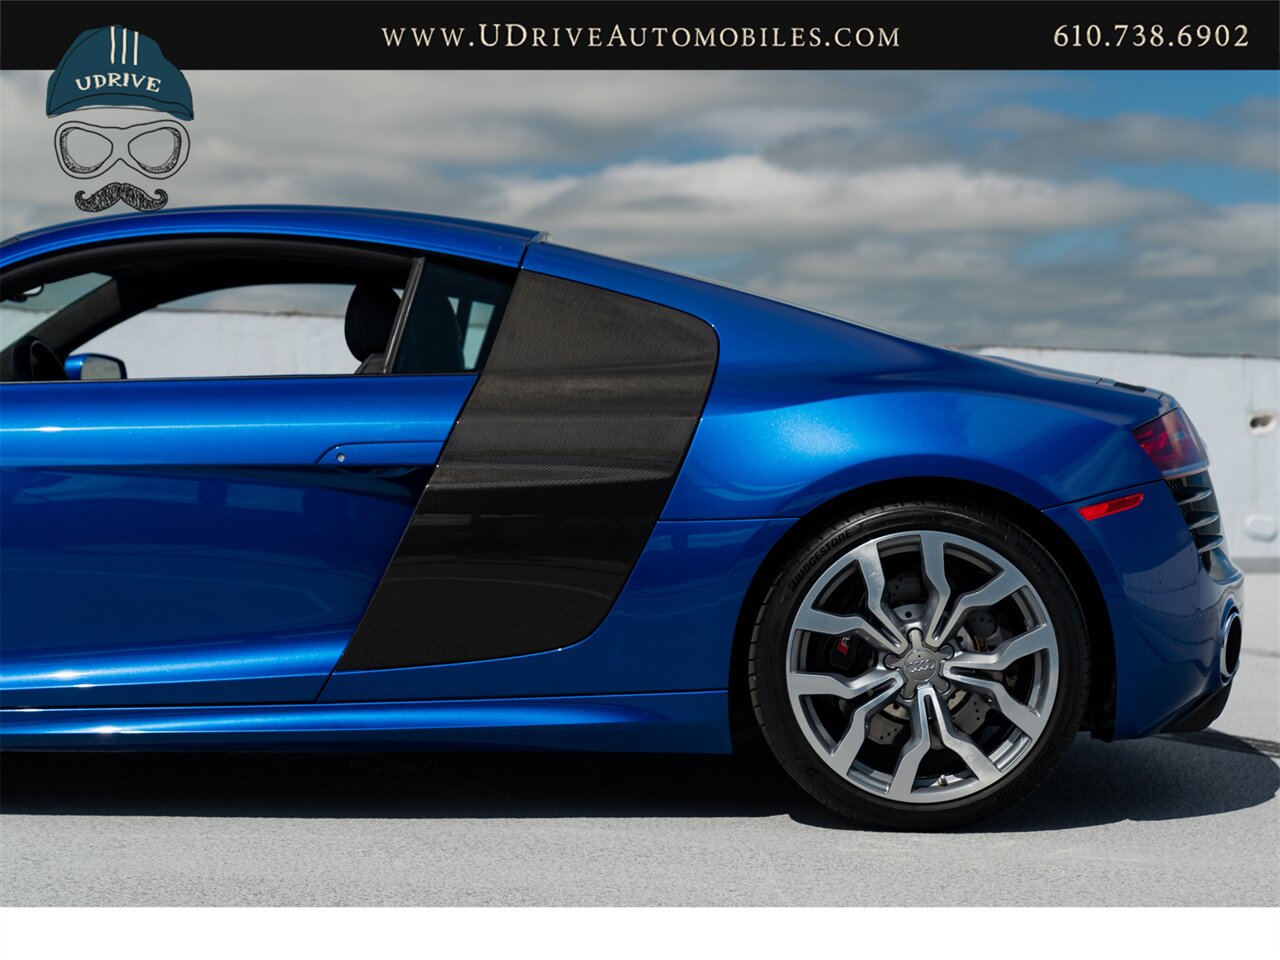 2015 Audi R8 5.2 V10 Quattro 6 Speed Manual 10k Miles  Diamond Stitched Leather 1 of 2 - Photo 24 - West Chester, PA 19382